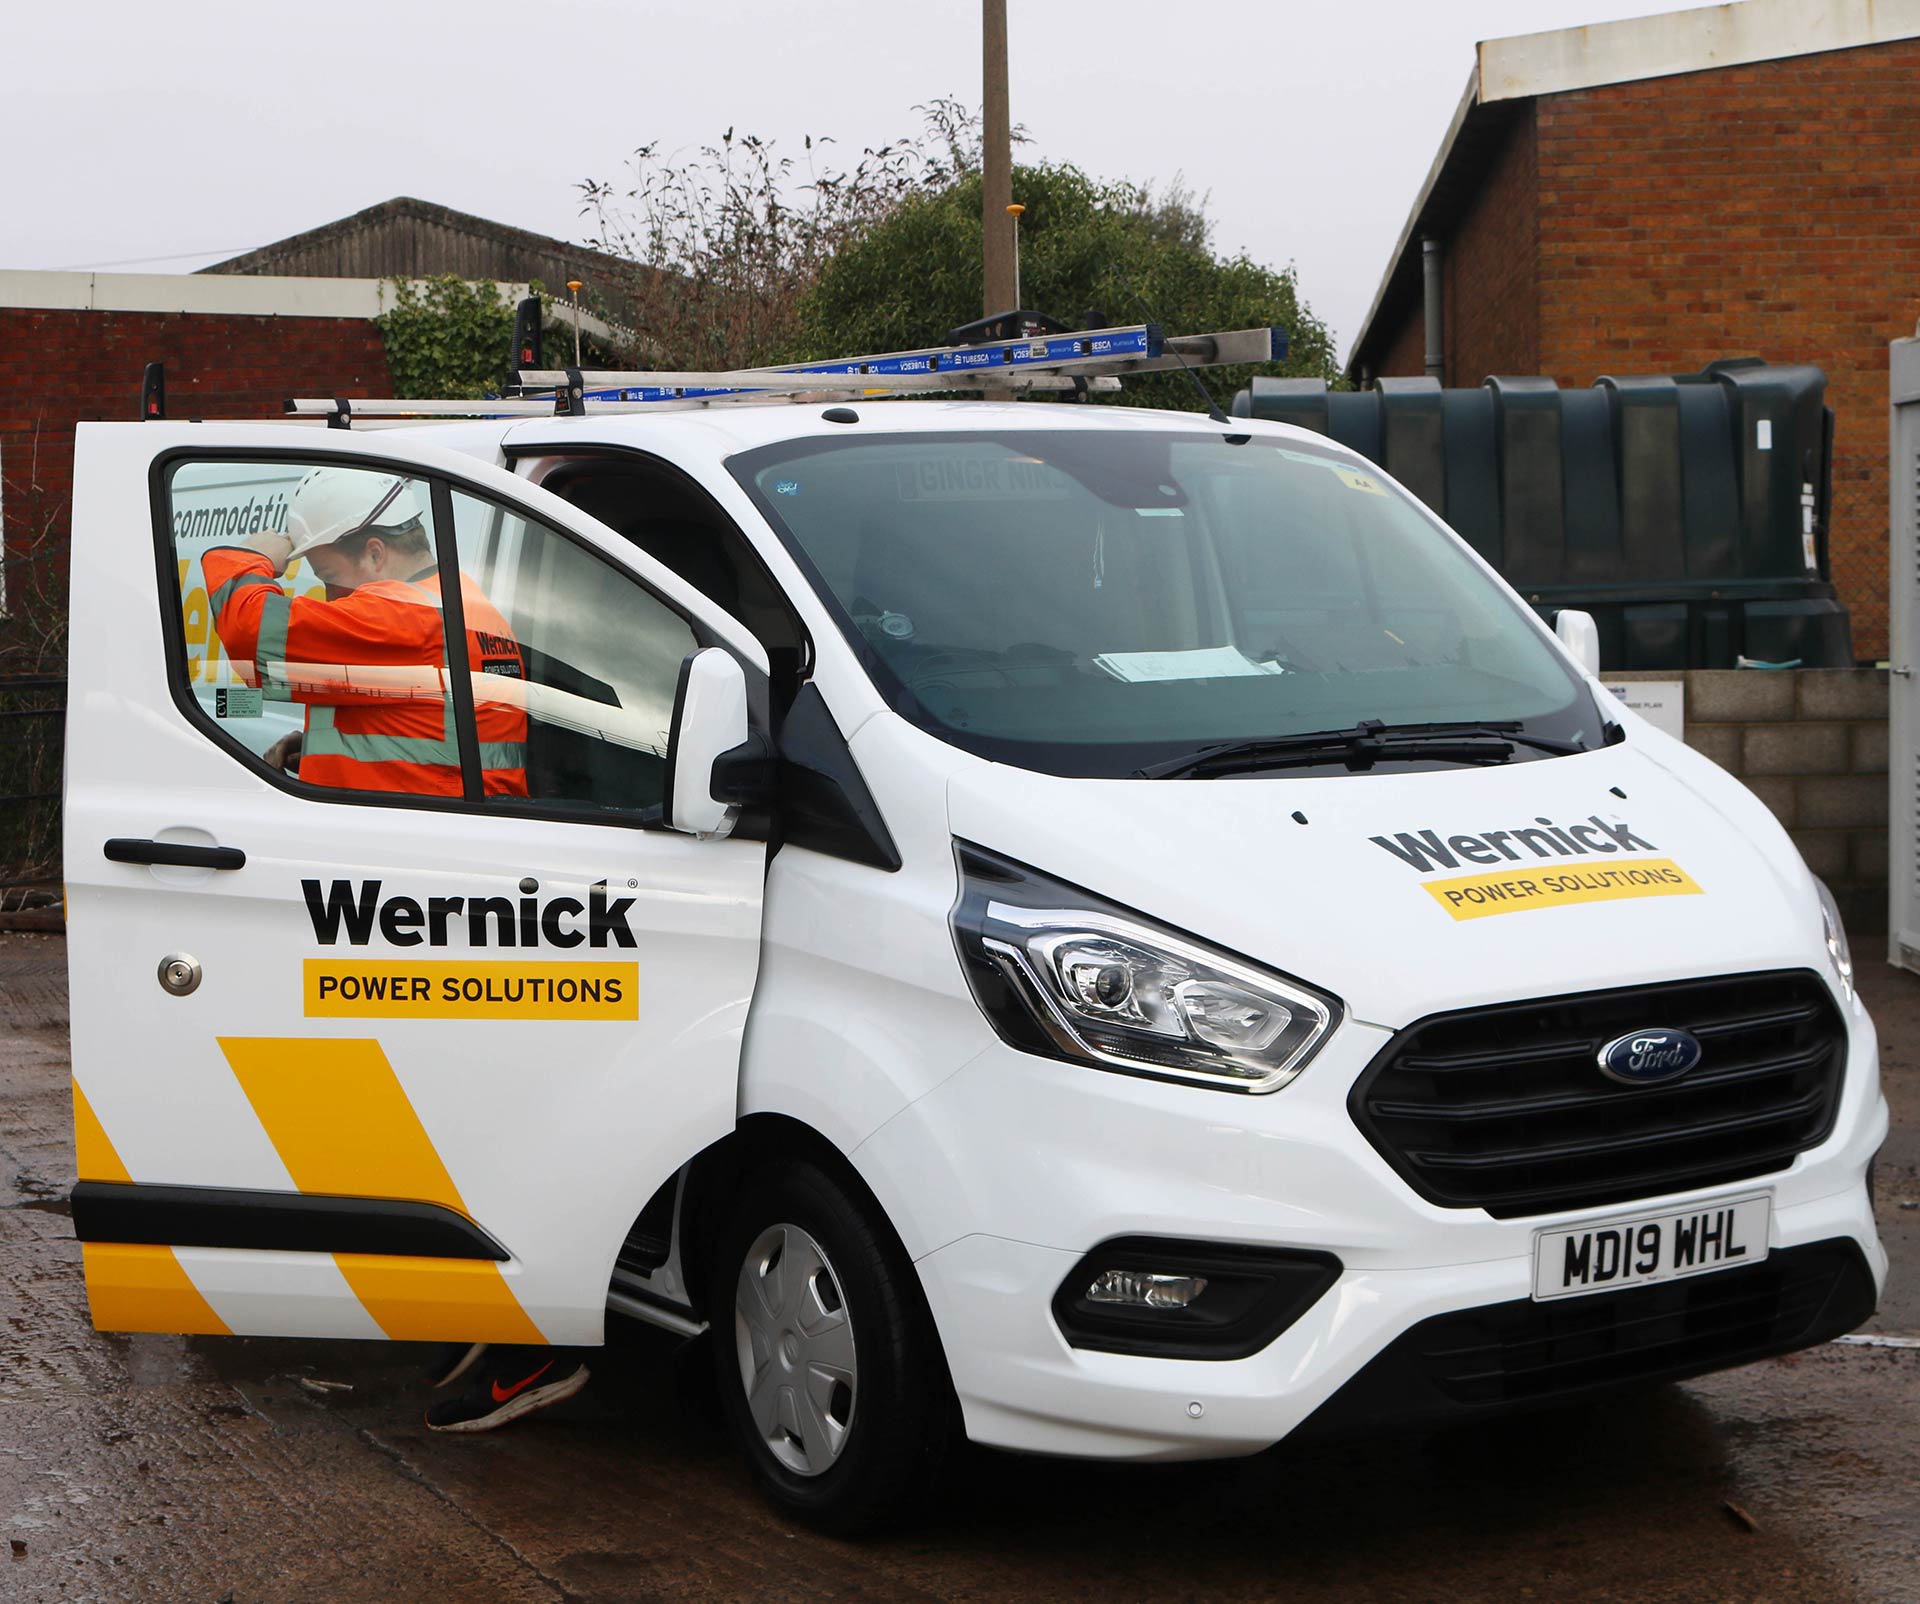 image of employee getting out of a Wernick Power Solutions van.